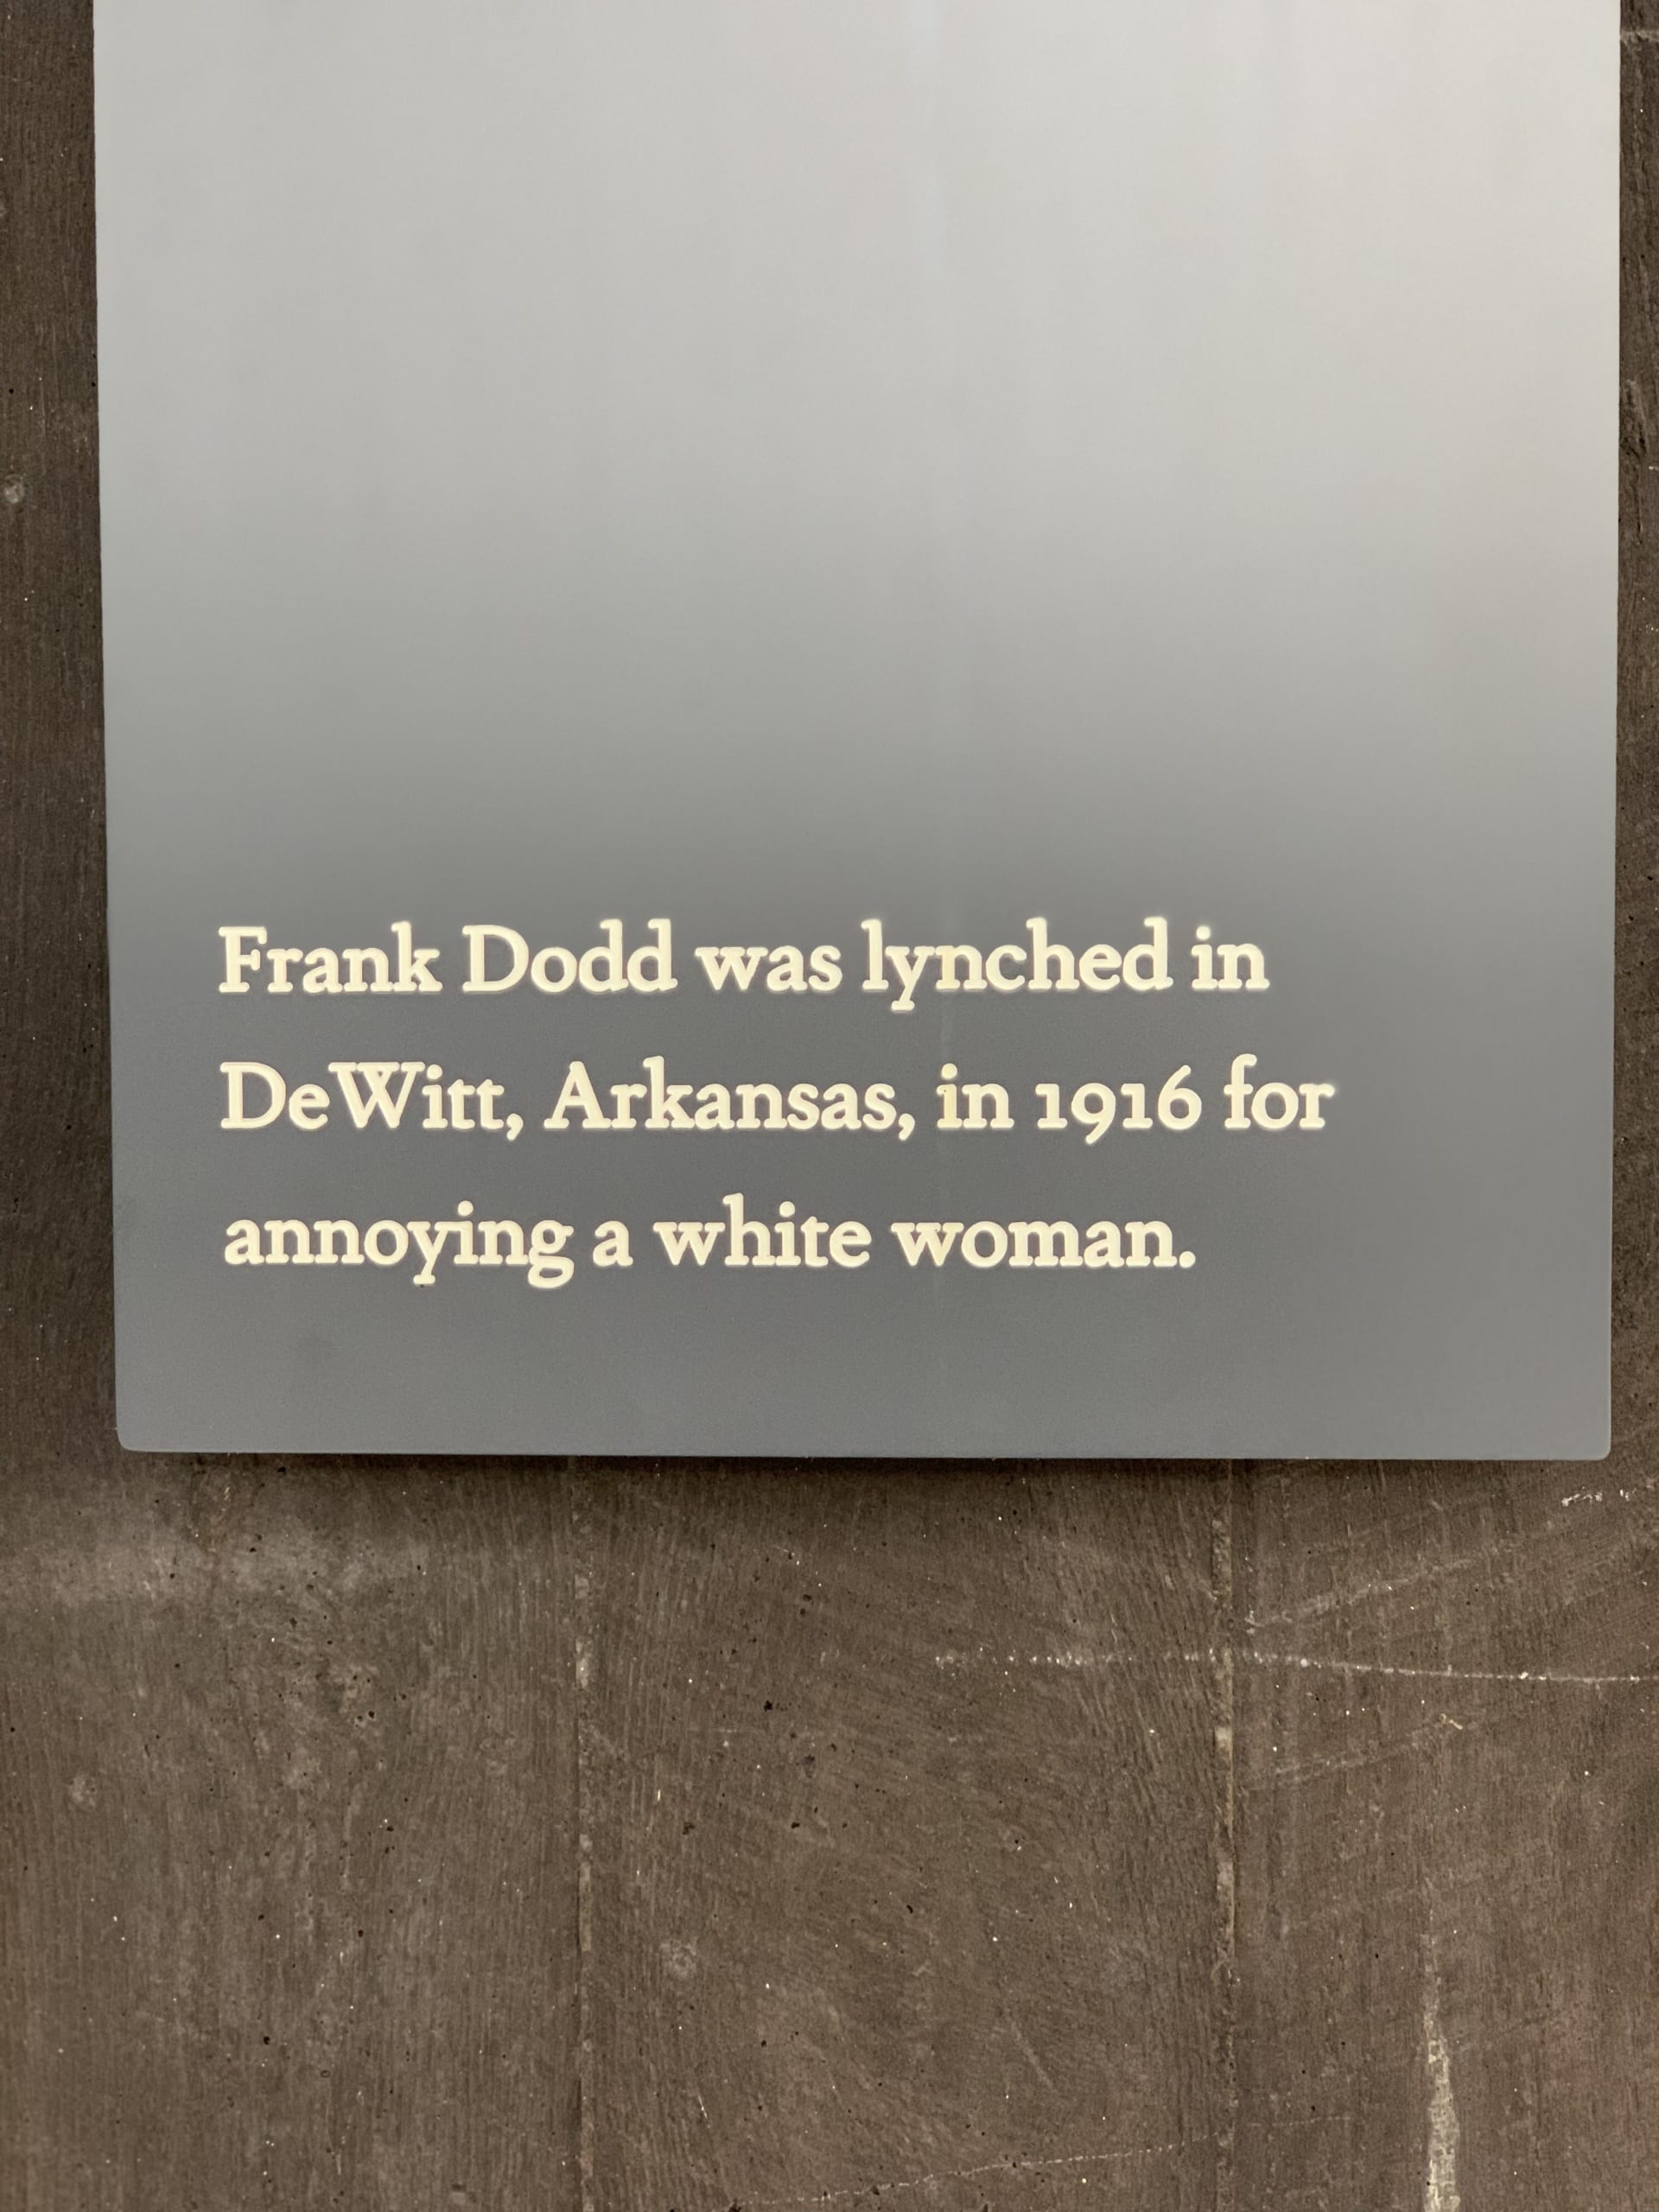 label reading "Frank Dodd was lynched in DeWitt, Arkansas, in 1916 for annoying a white woman"